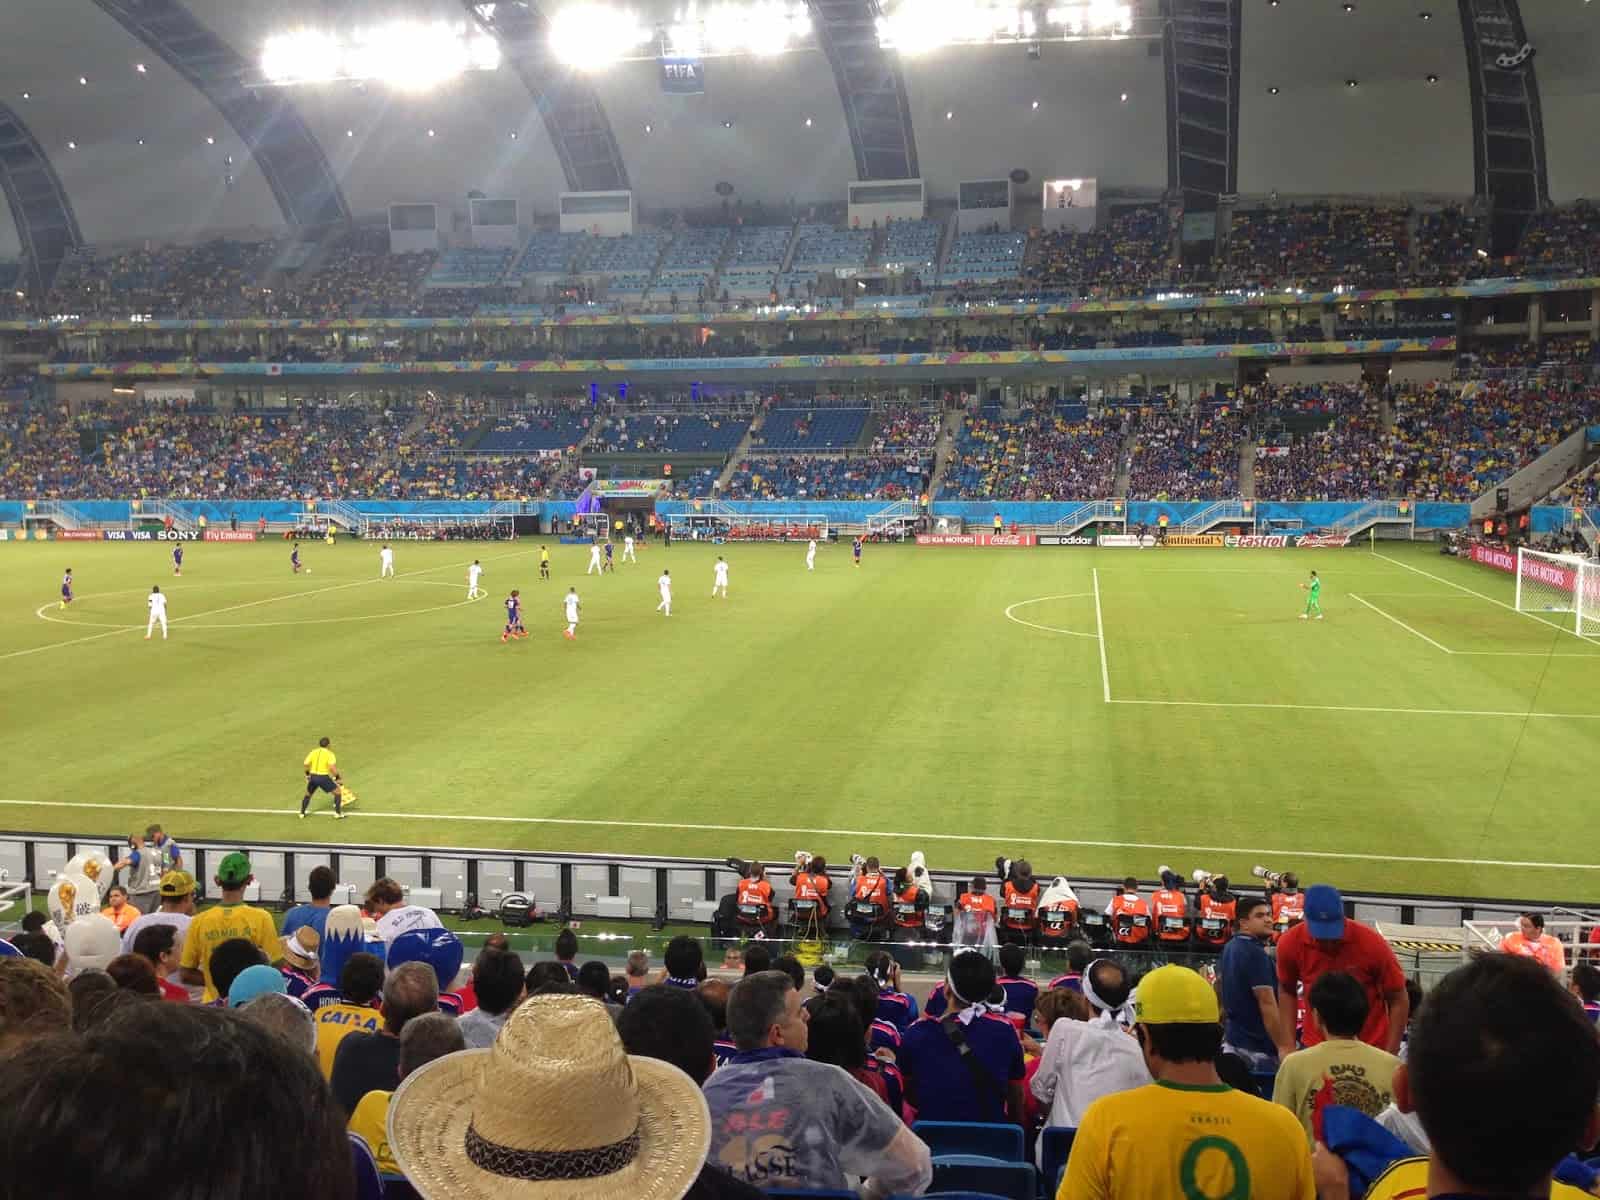 Greece vs Japan World Cup 2014 at Arena das Dunas in Natal, Brazil